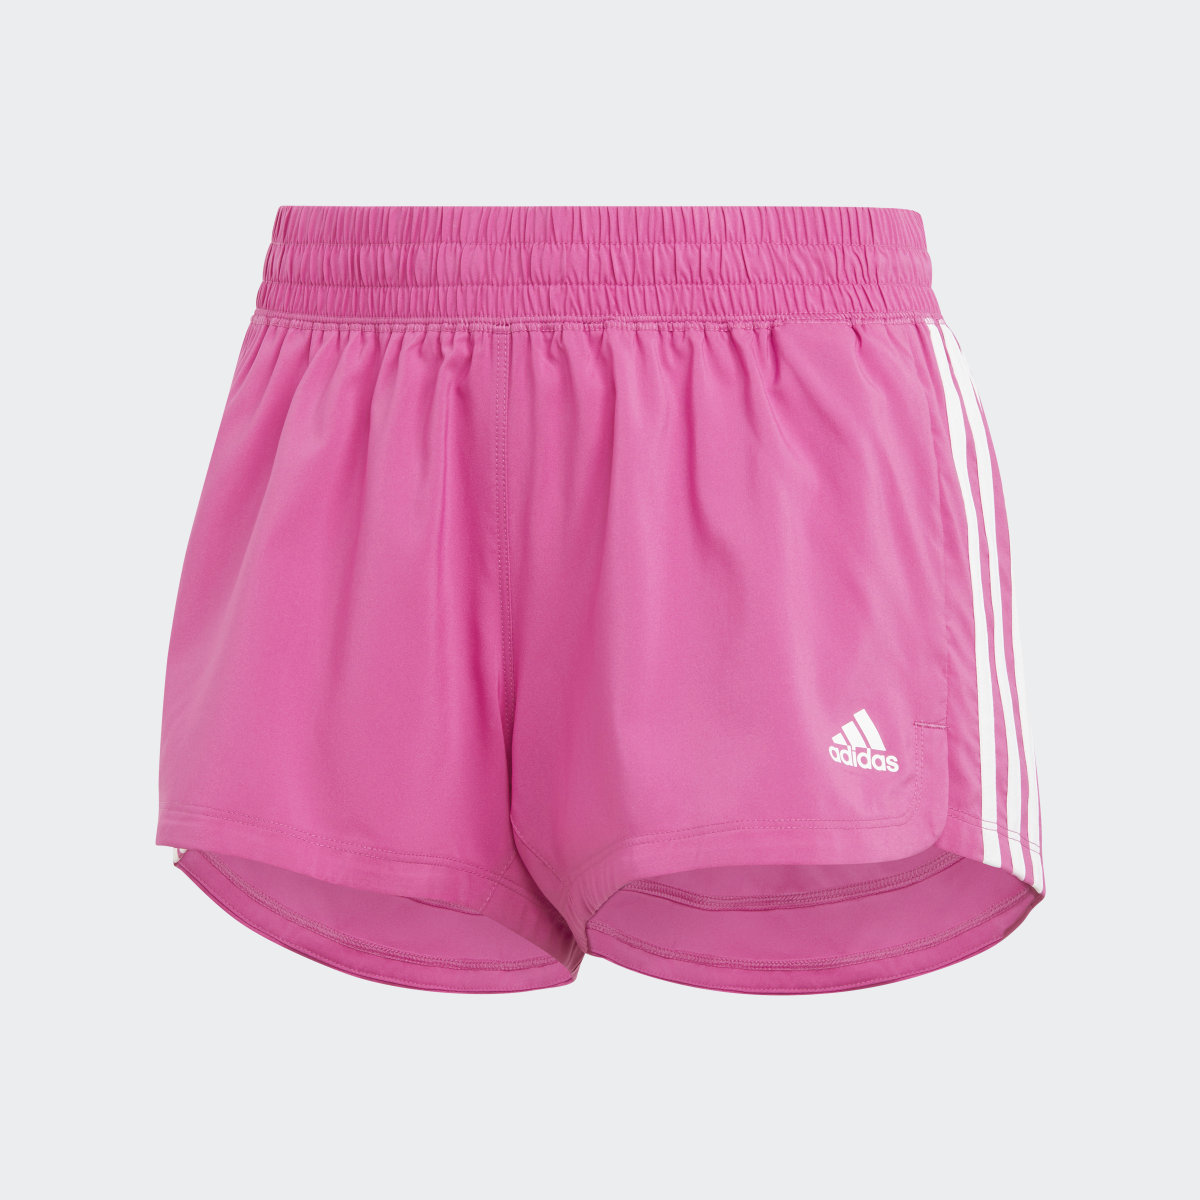 Adidas Pacer 3-Stripes Woven Shorts. 4